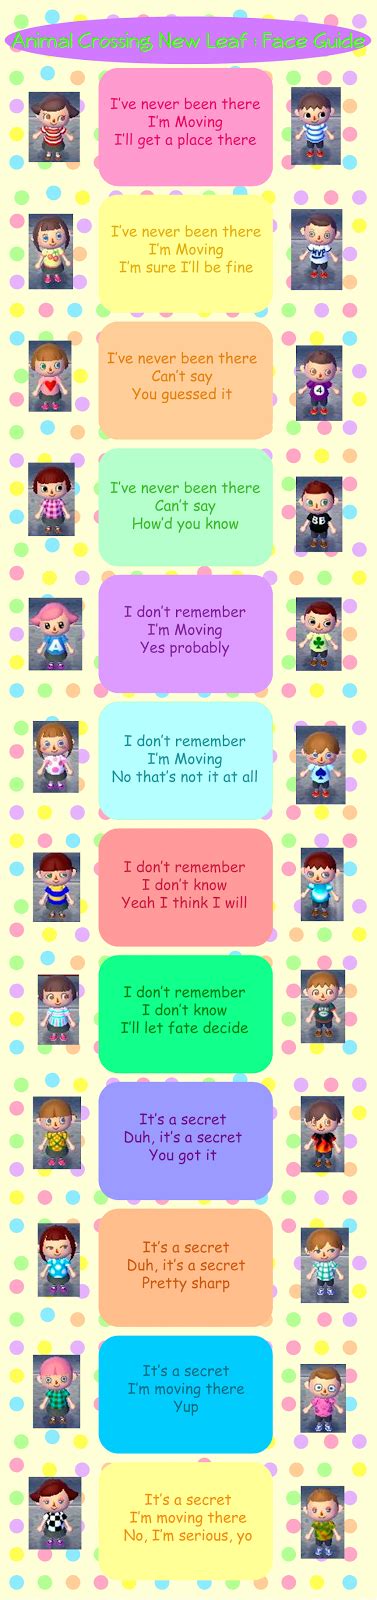 The store is run by harriet. Animal Crossing New Leaf Face Guide by RobynisDreaming | games | Pinterest | Inspiration